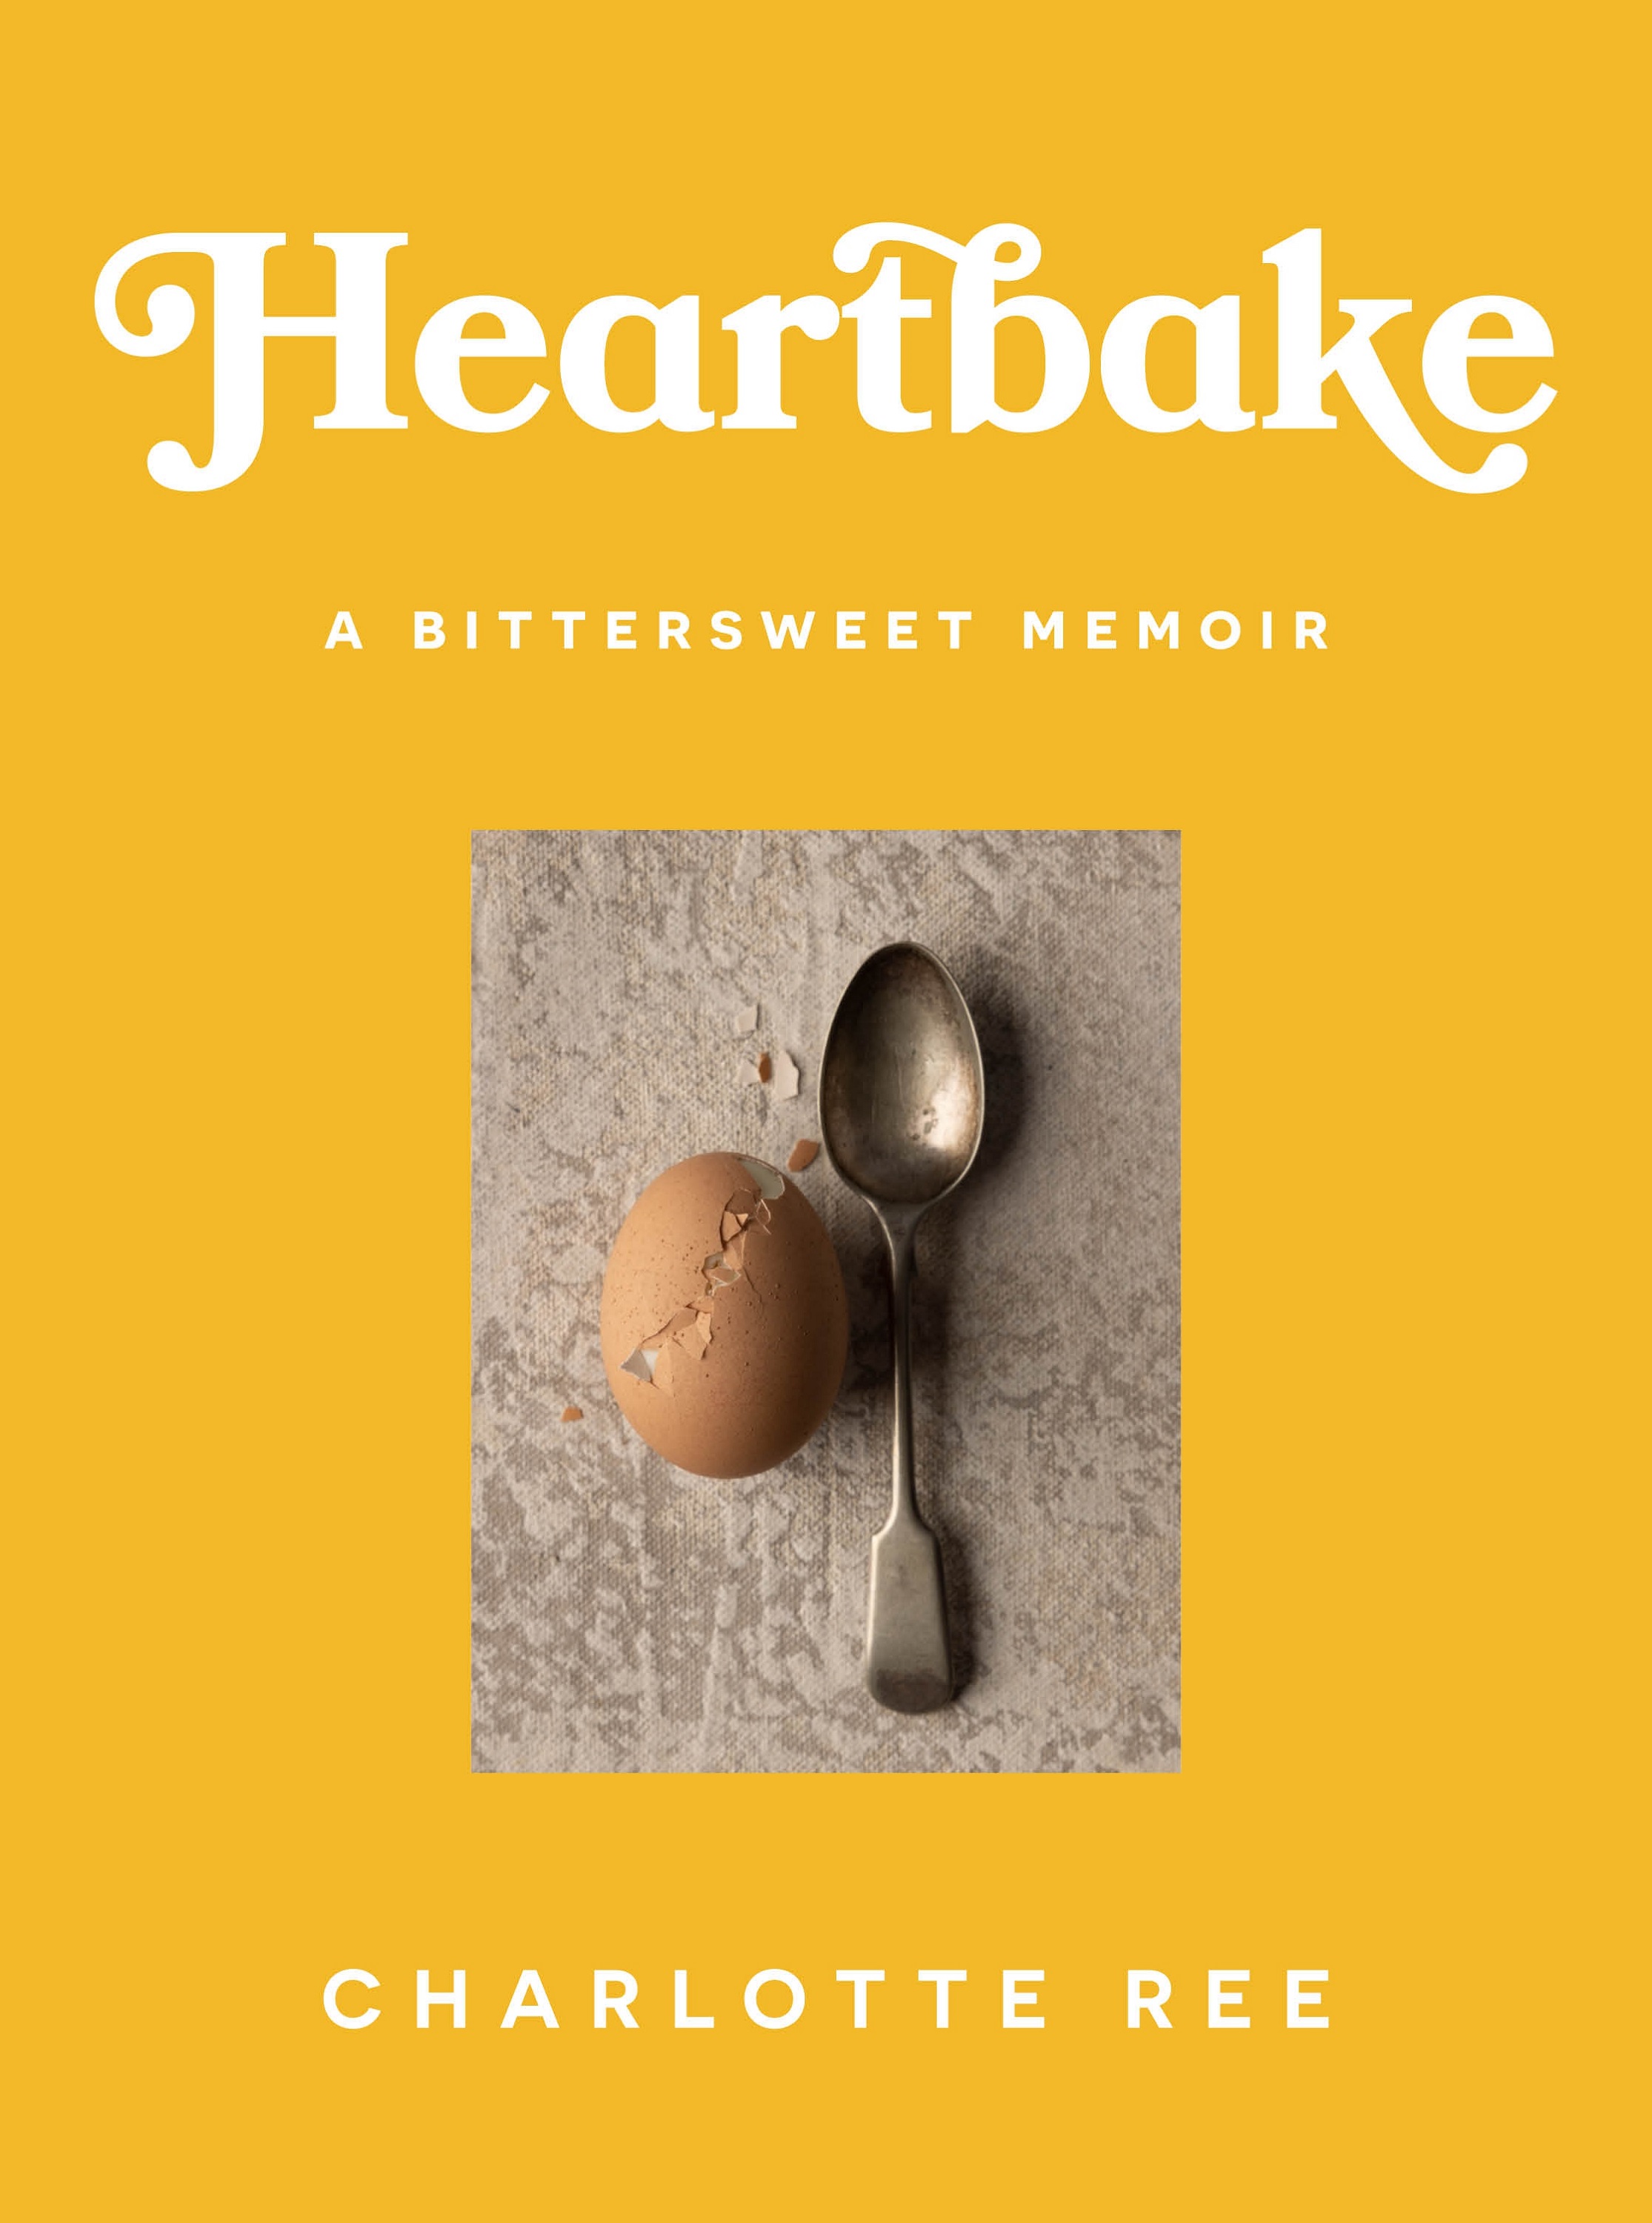 A book cover showing a photo of a teaspoon and an egg set against a yellow background